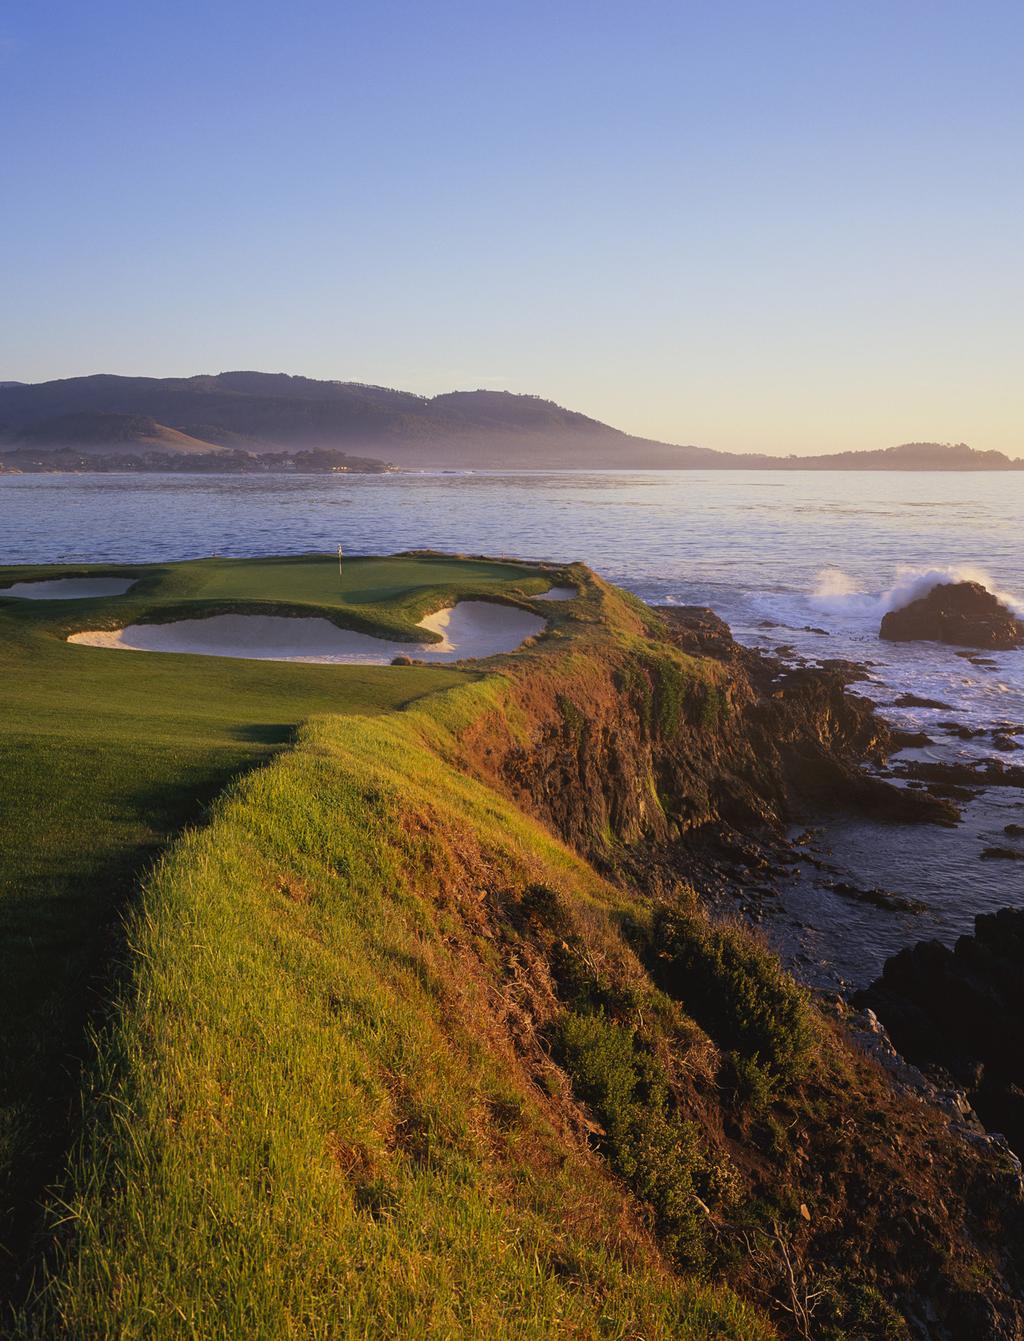 We look forward to seeing you on the pristine fairways of Pebble Beach Golf Links and Spyglass Hill Golf Course, where we will